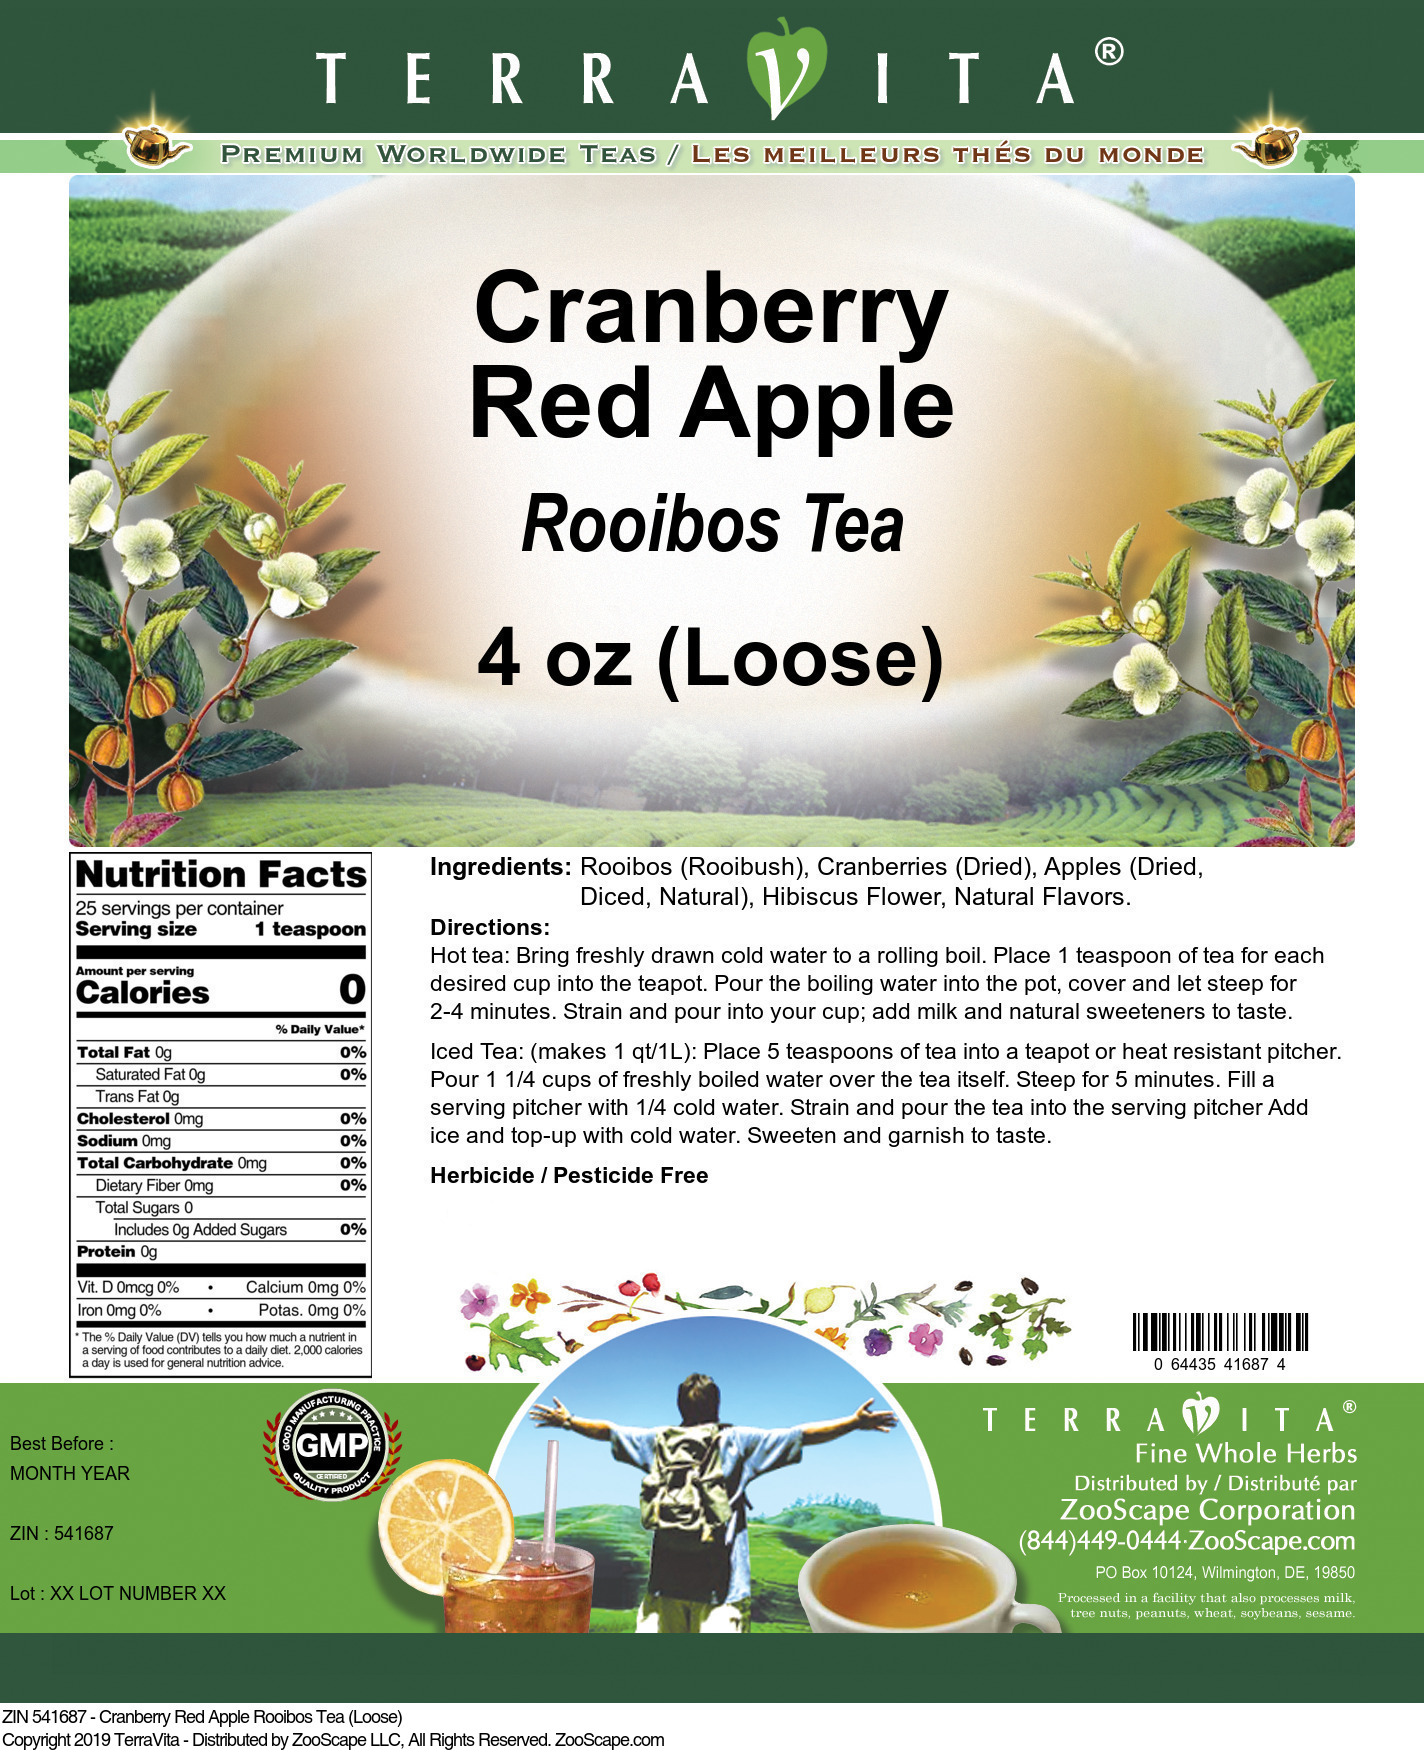 Cranberry Red Apple Rooibos Tea (Loose) - Label